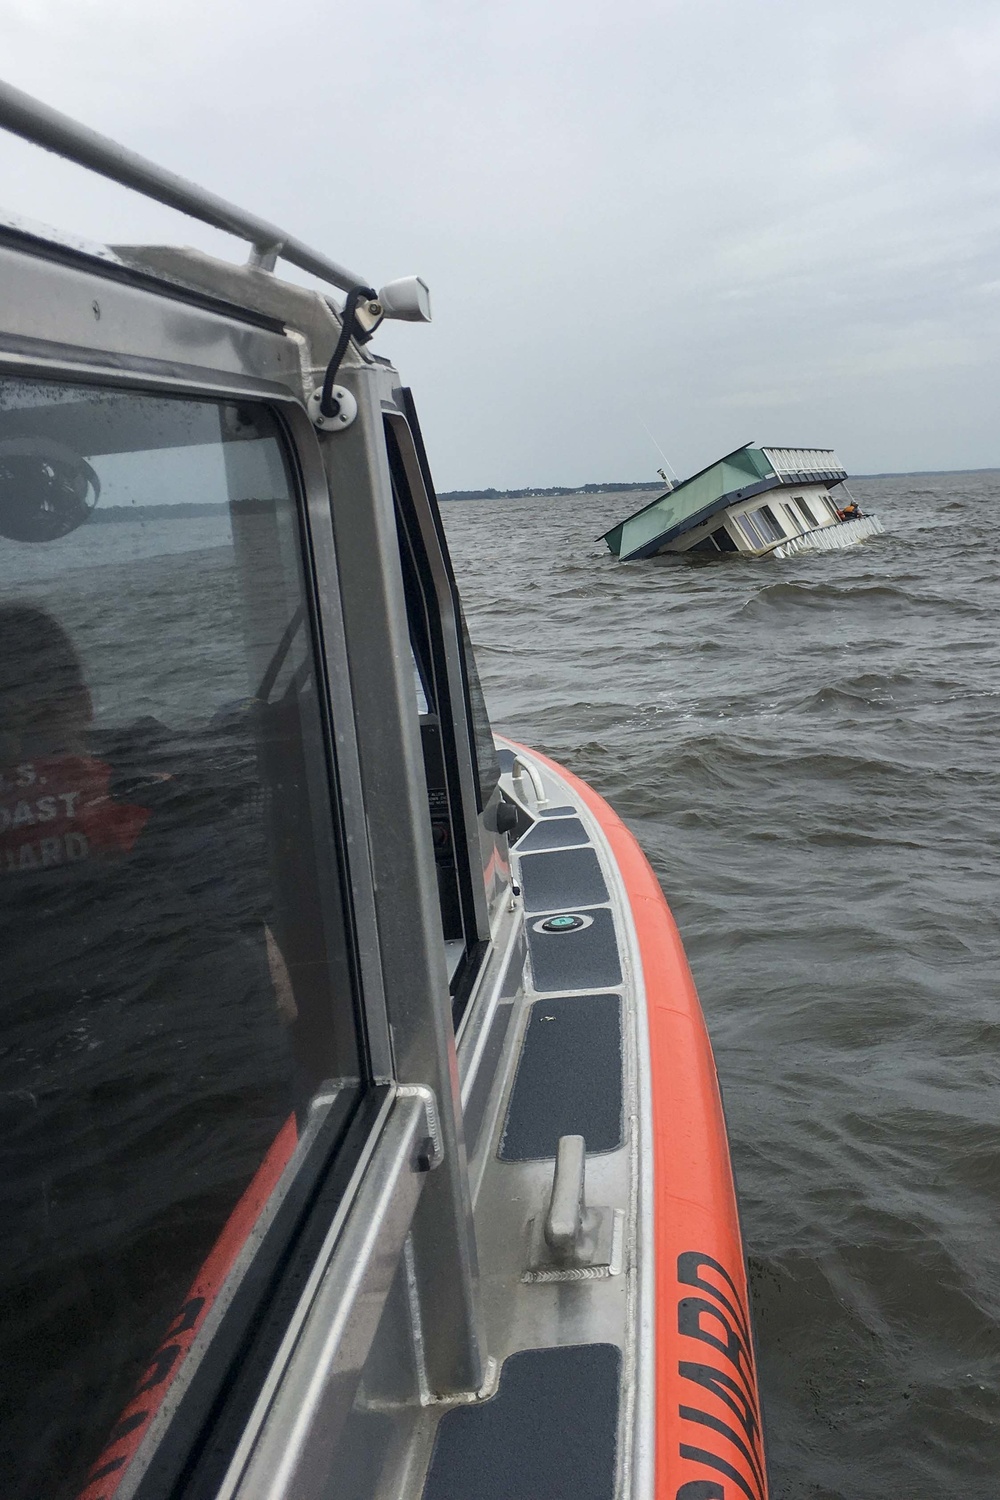 Coast Guard rescues 2 people, 1 cat from sinking houseboat